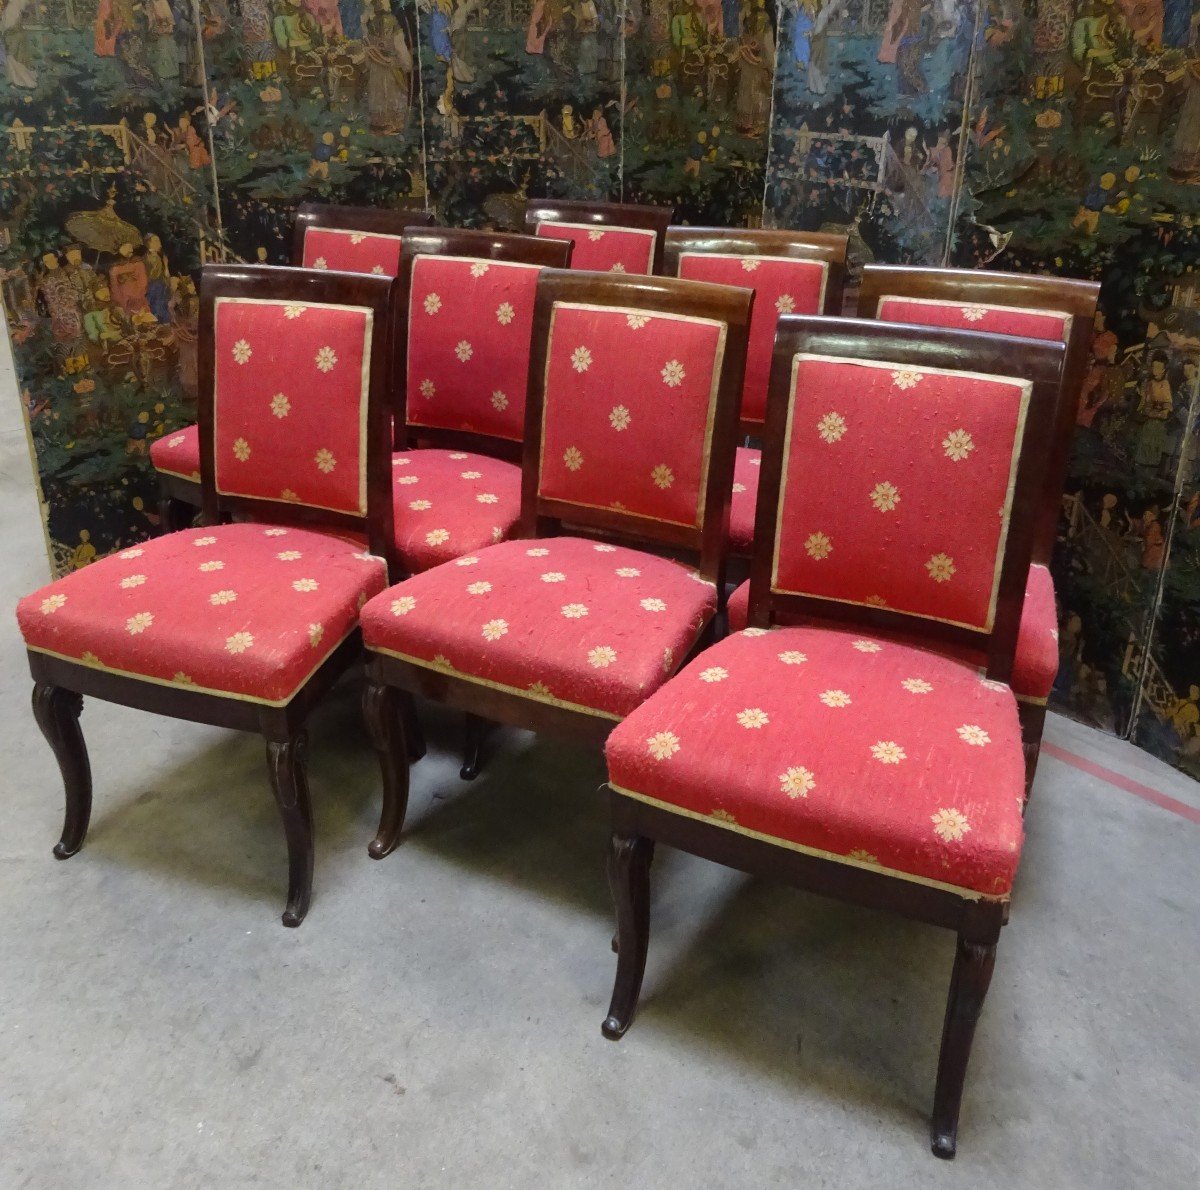 Suite Of Mahogany Chairs From The Restoration Period By Jeanselme.-photo-2